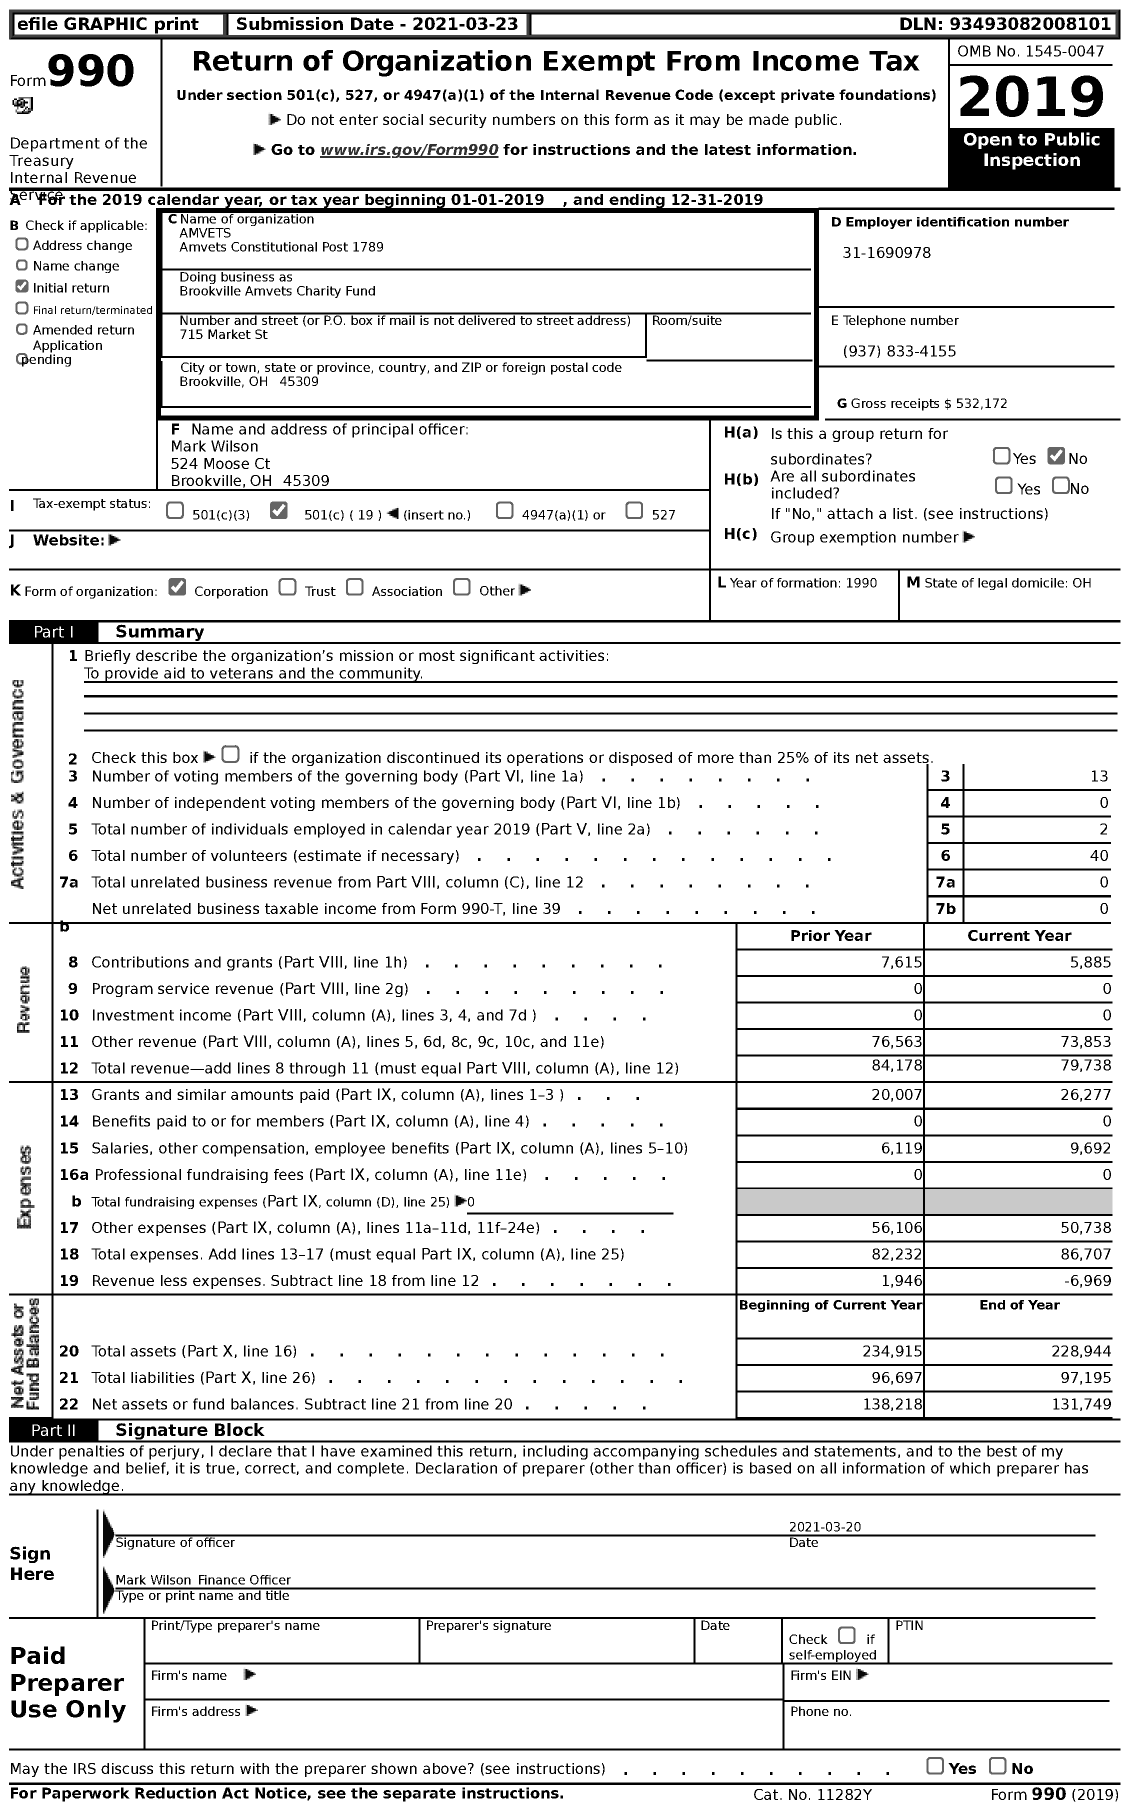 Image of first page of 2019 Form 990 for AMVETS 1789 Constitutional Post